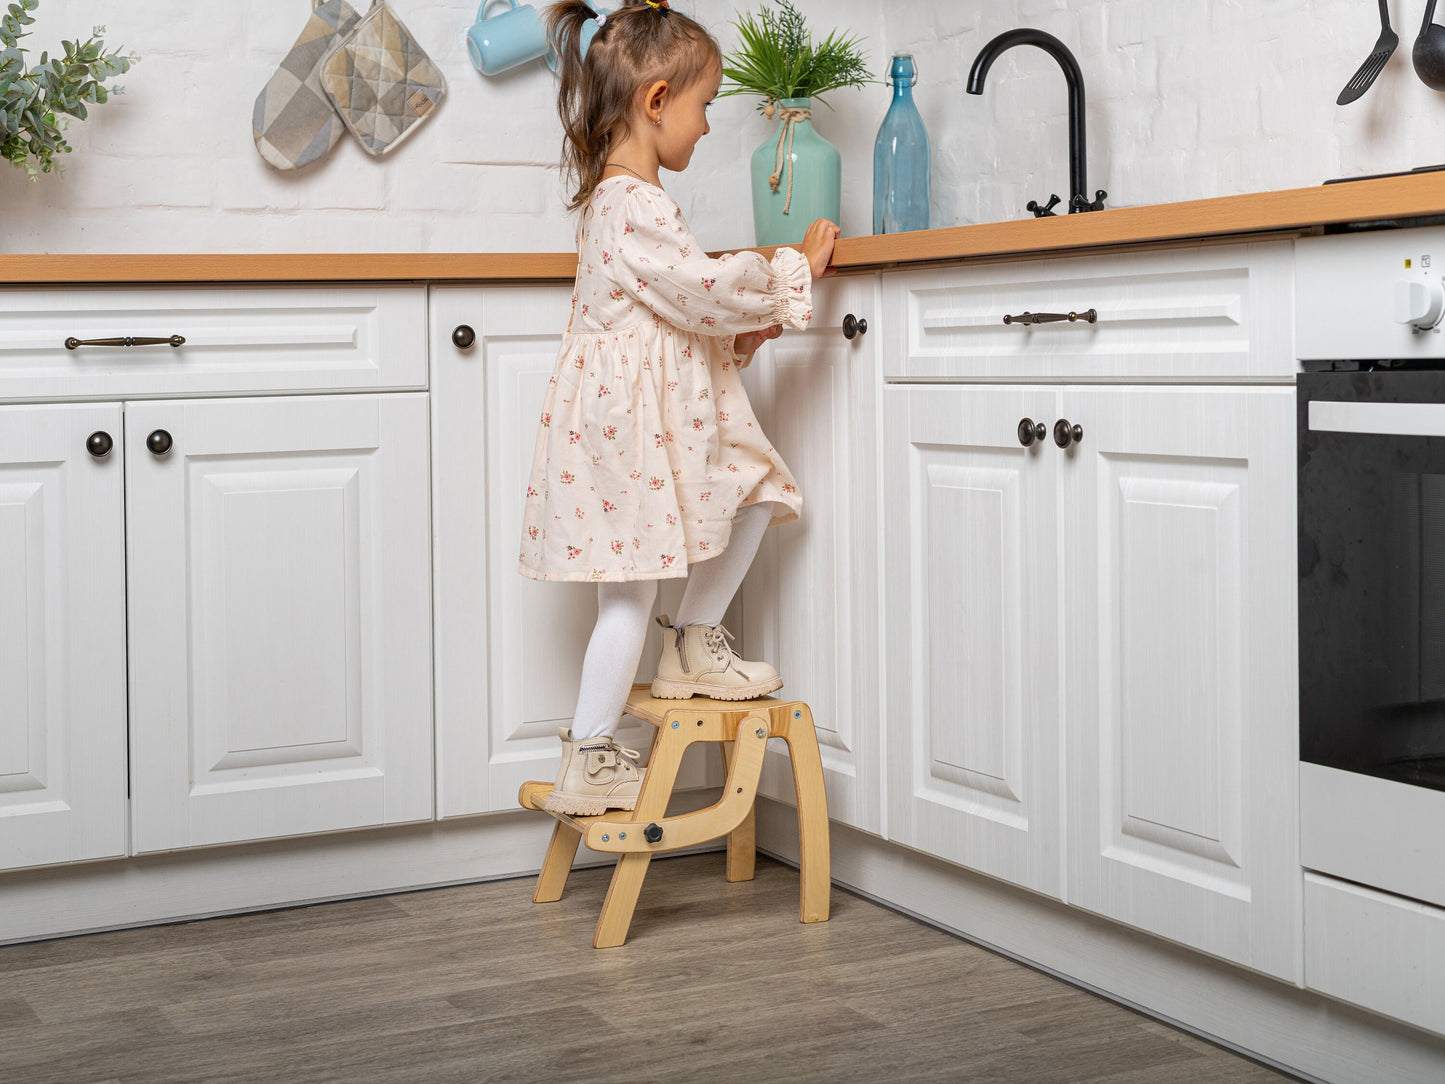 Toddler step stool & chair 2in1, toddler chair with back